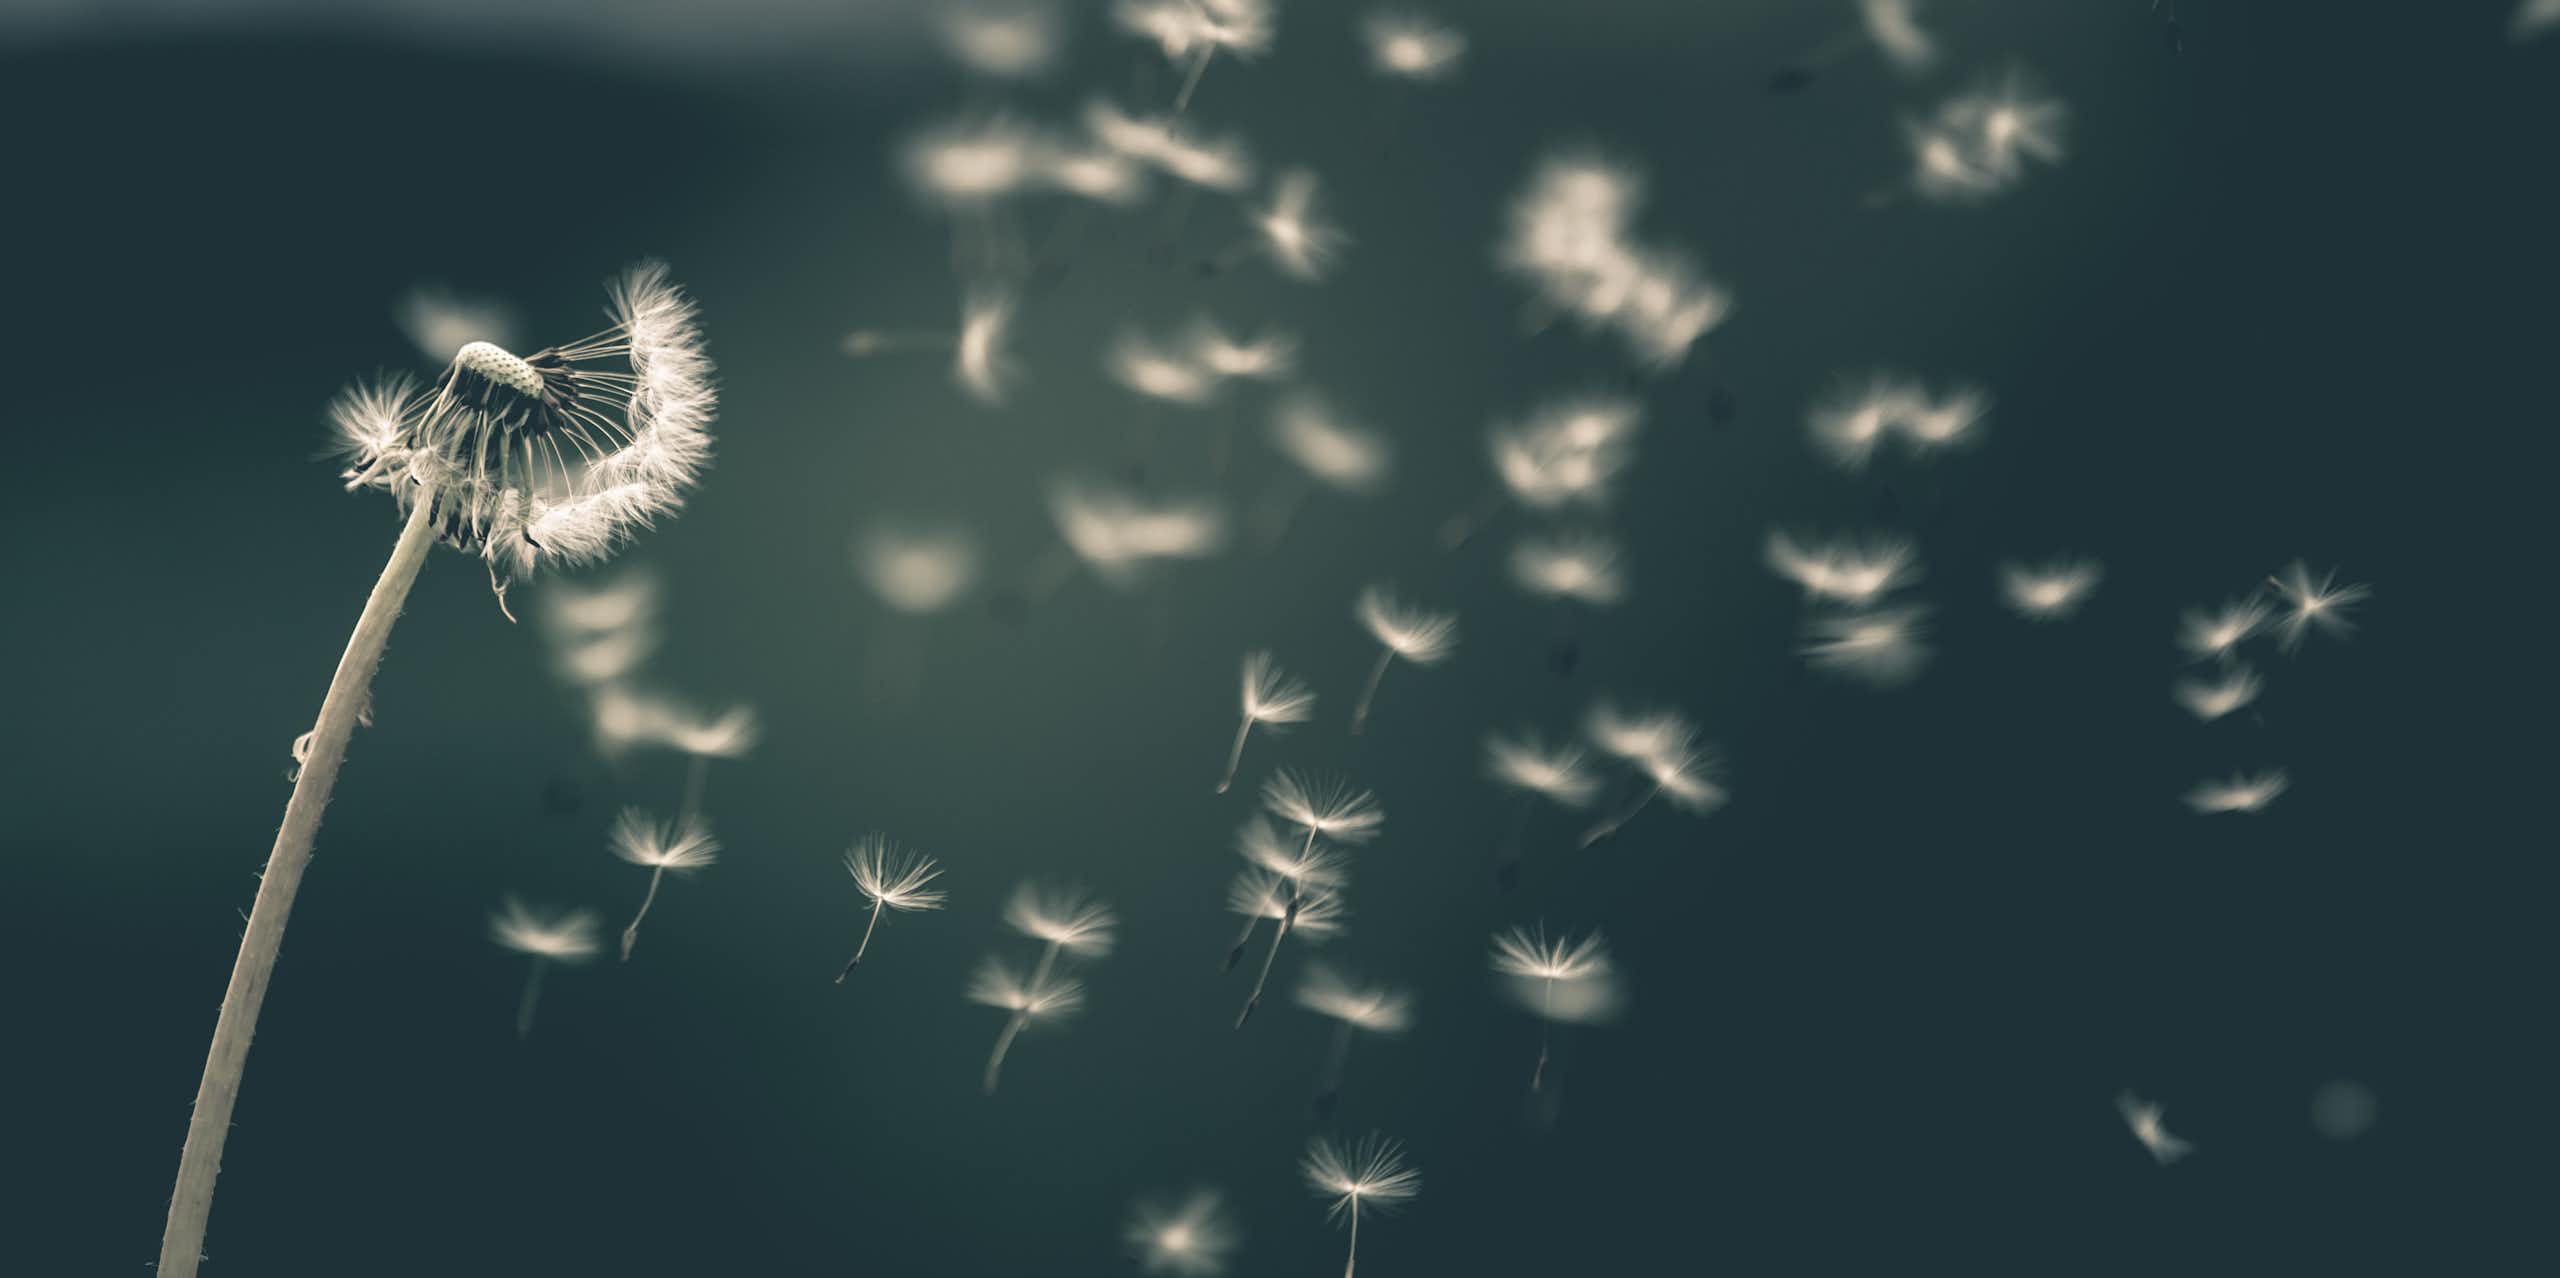 A dandelion seed head scattering its seeds in the wind